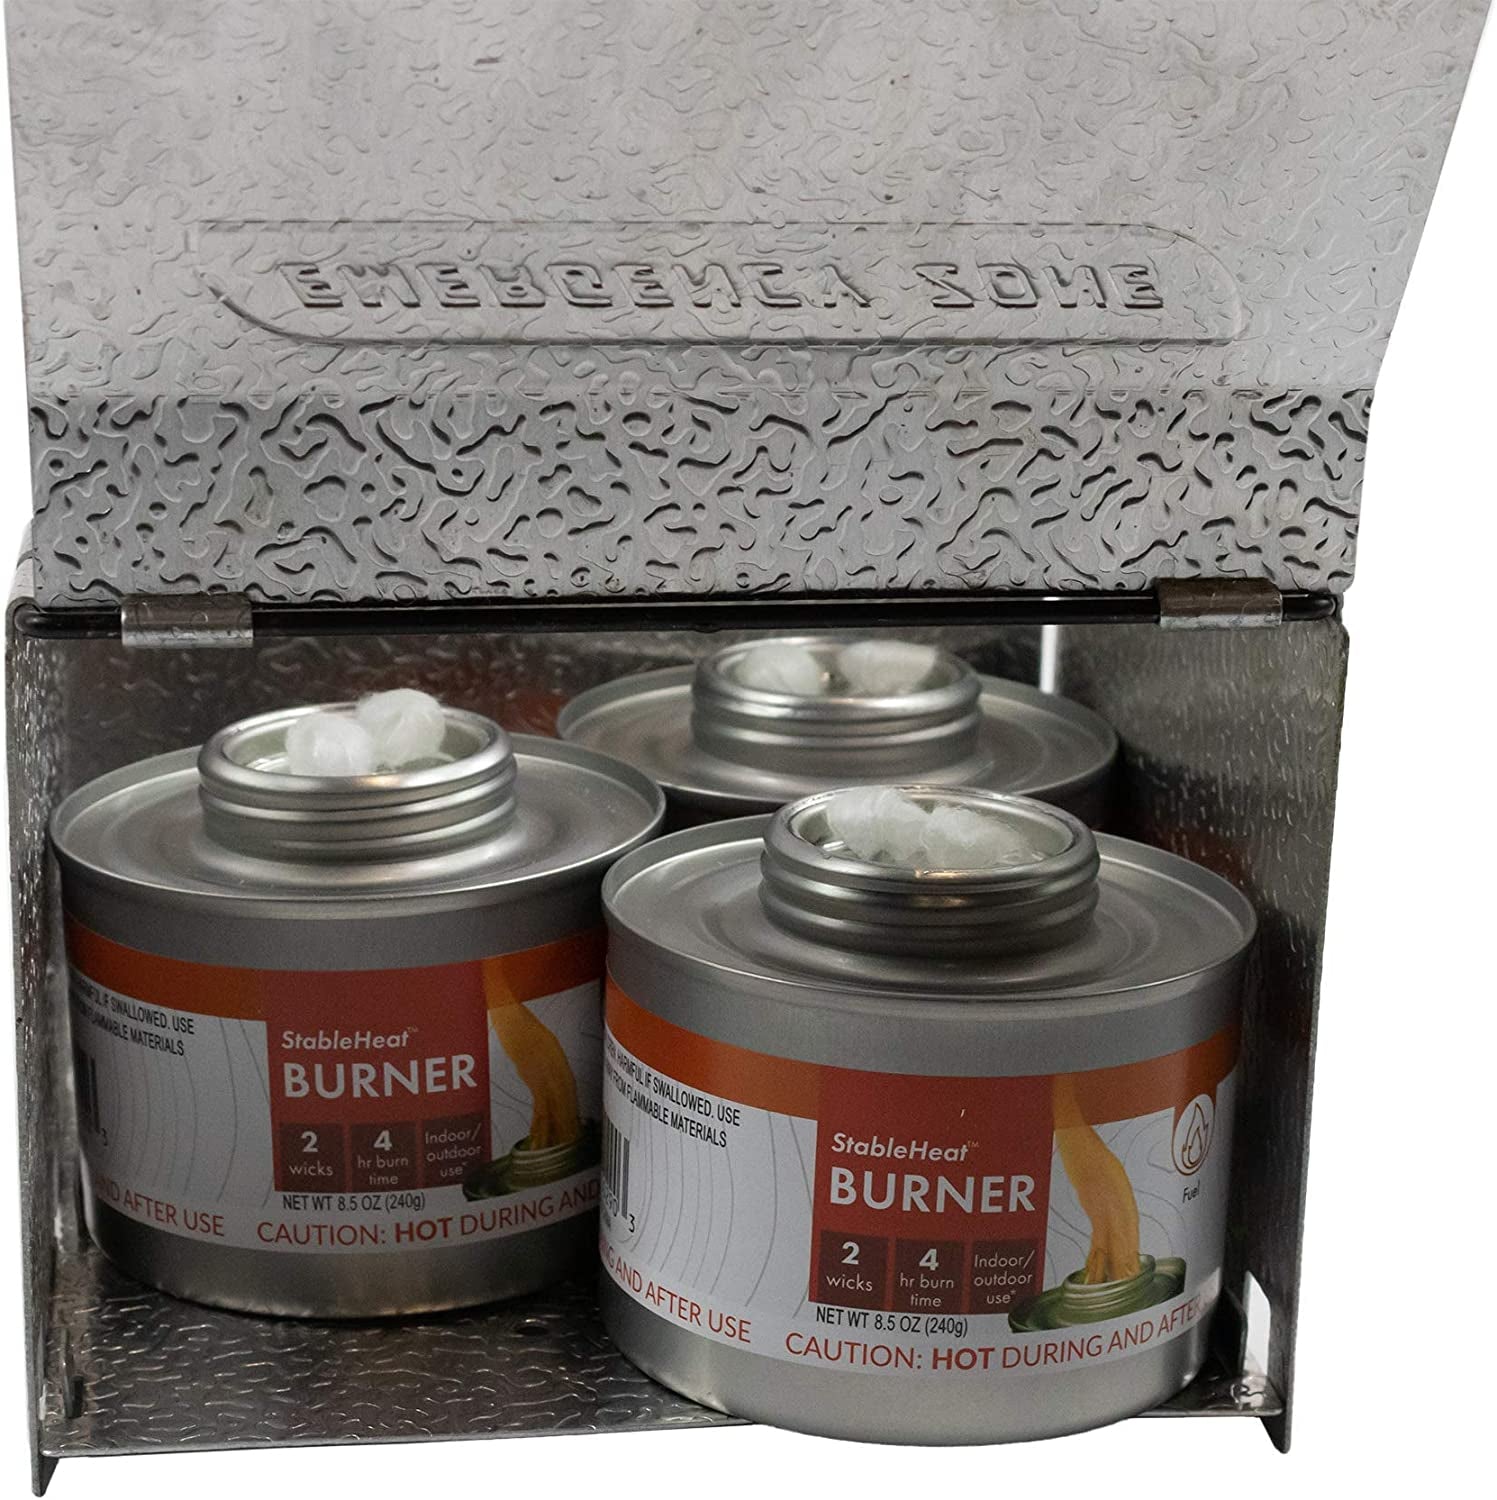 New & Improved! Emergency Cooking Fuel Premium Storage Set, 20+ Year Shelf Life | Available in 4 Cans, 12 Cans, or 24 Can Packs